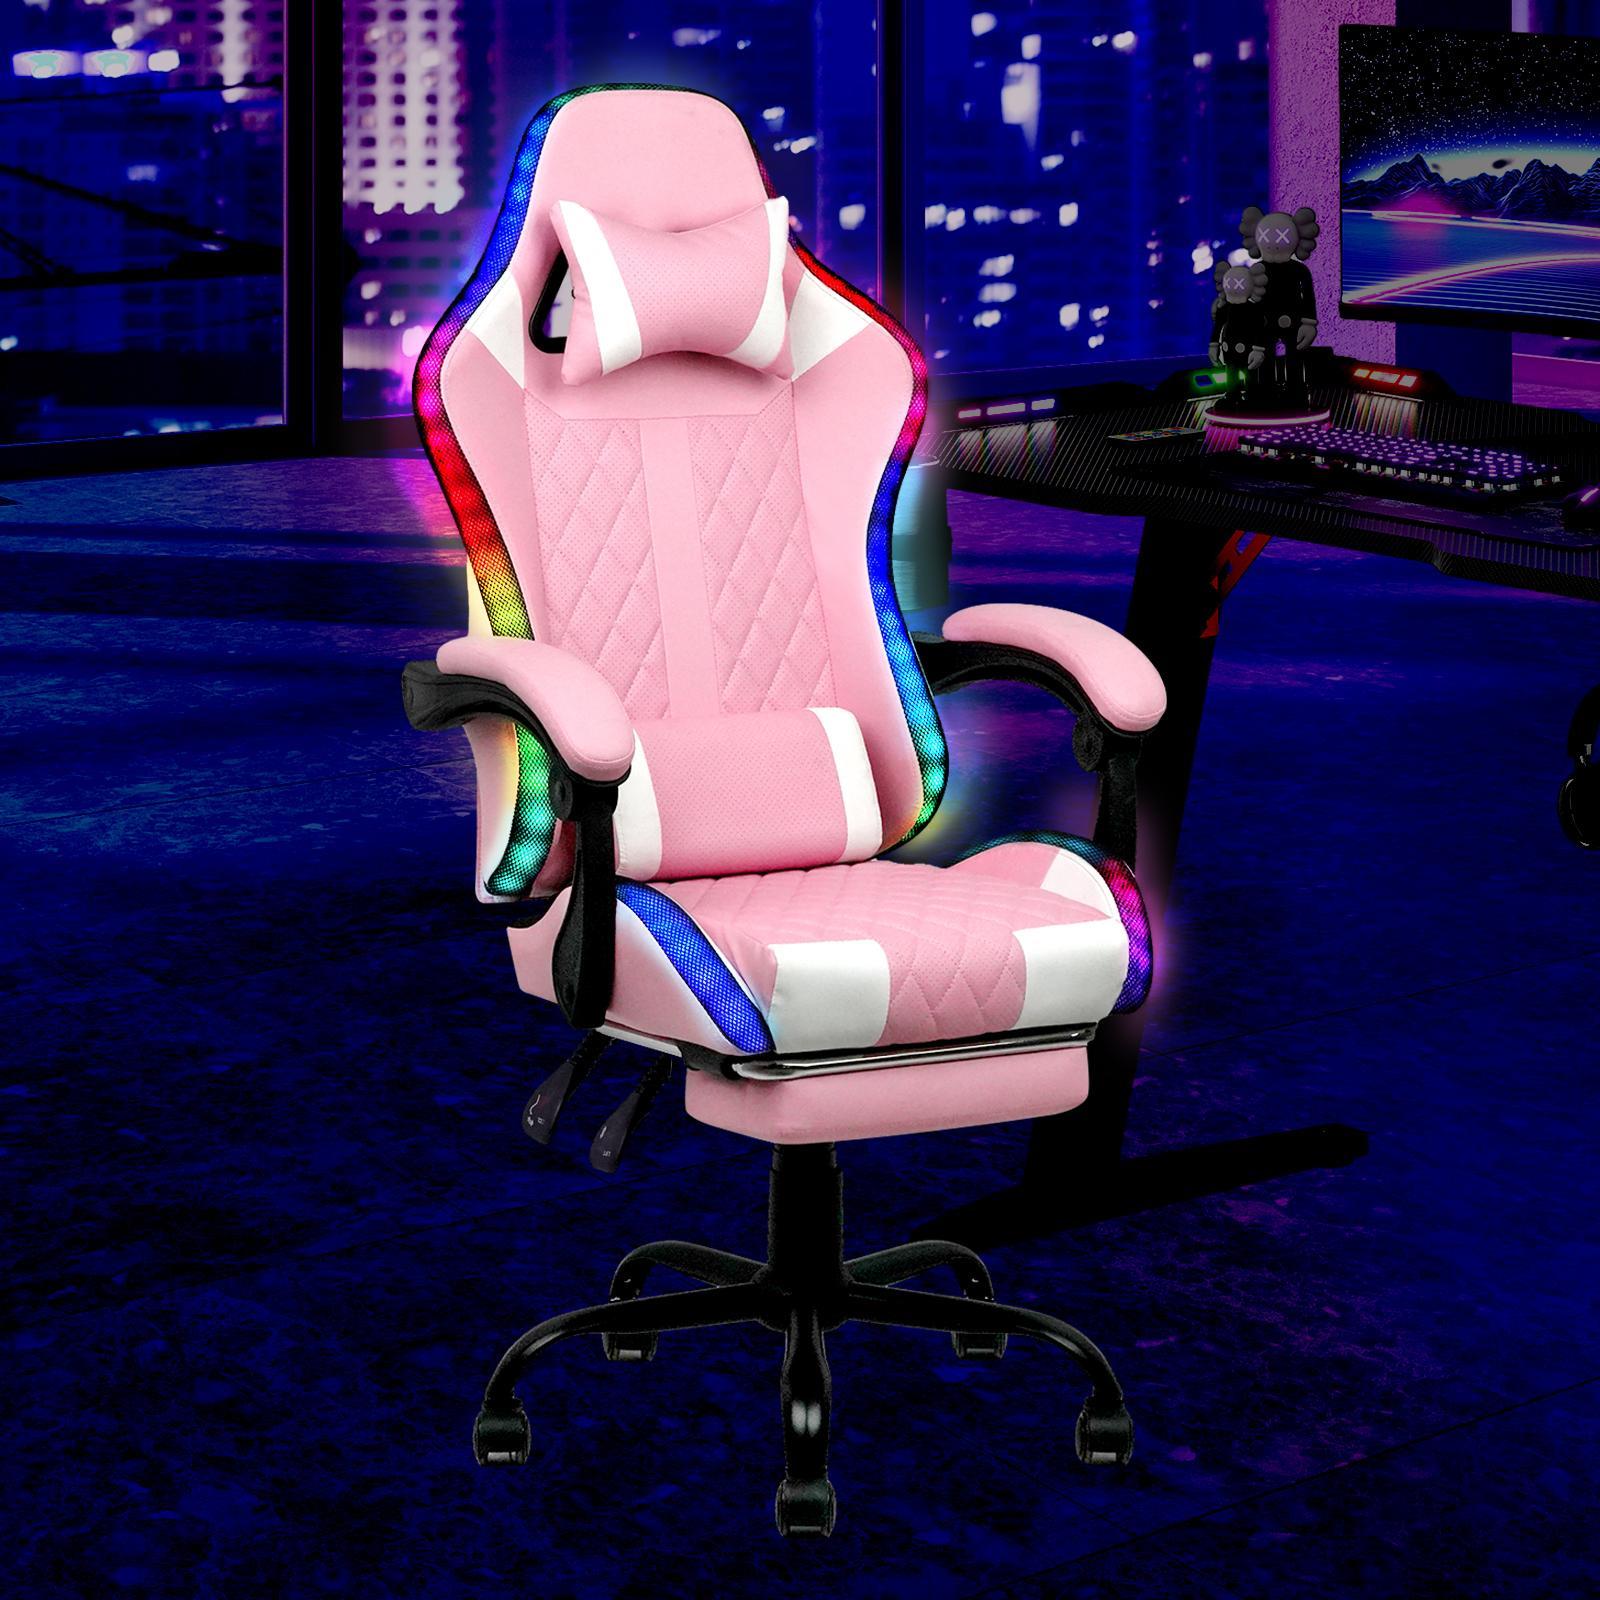 Advwin Gaming Chair with 7 Massagers and 12 RGB LED Lights w/ Footrest Pink & White